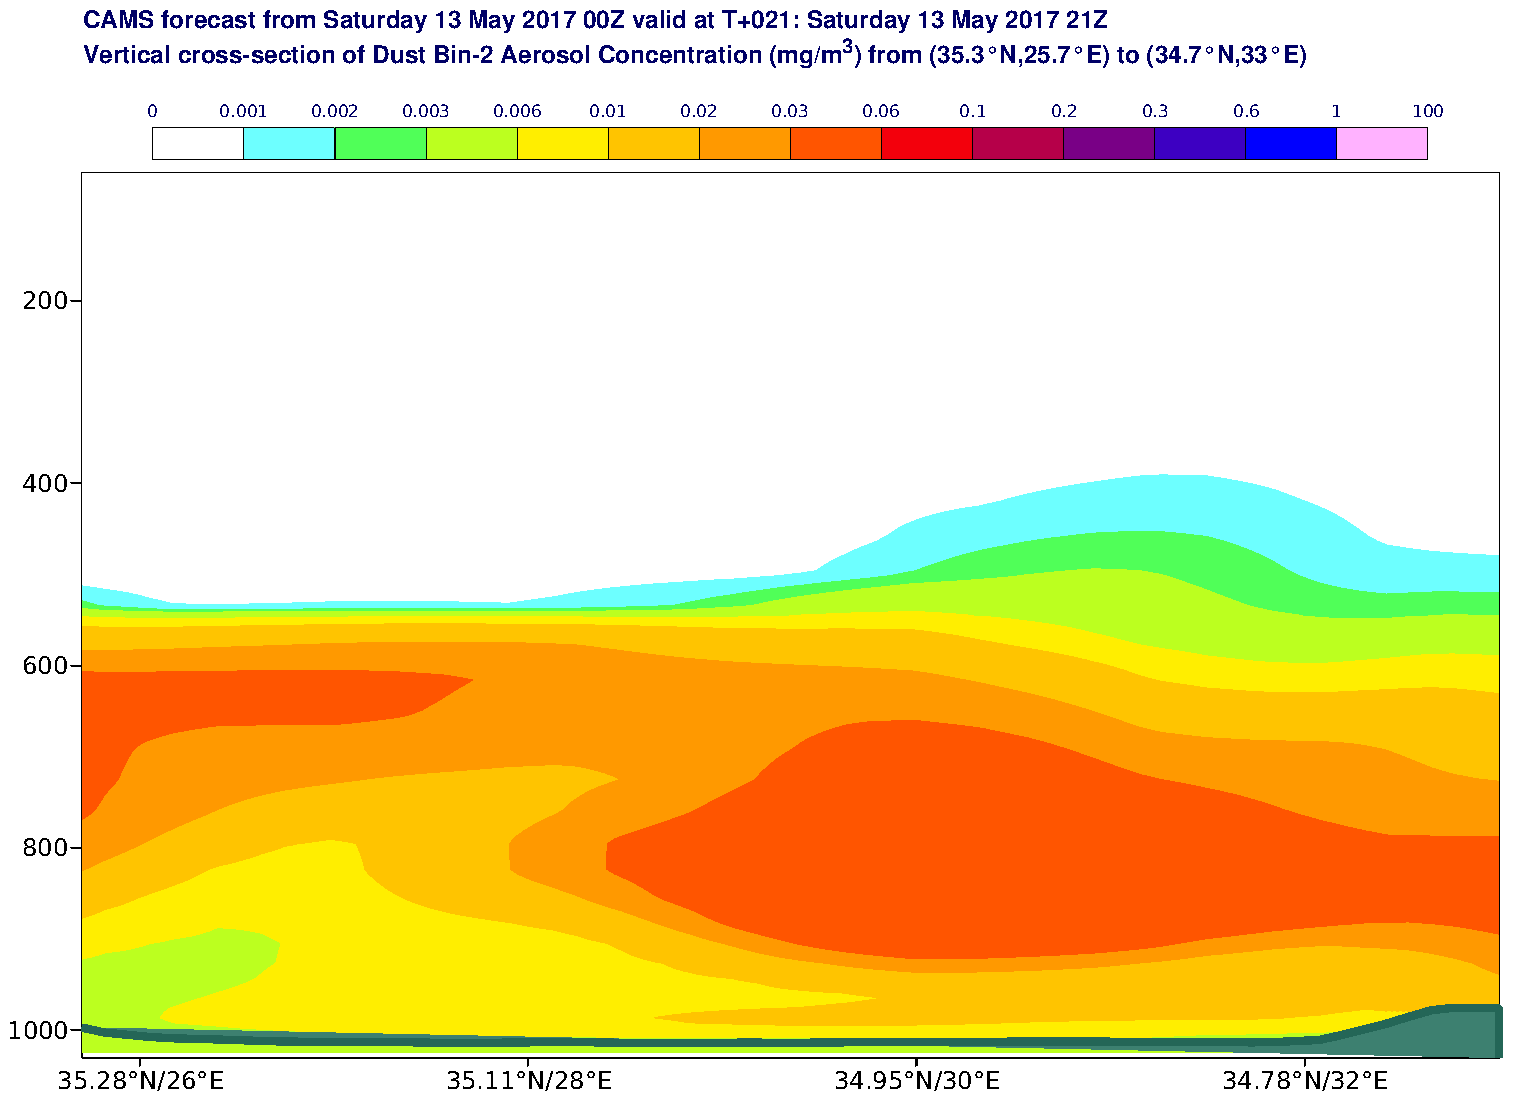 Vertical cross-section of Dust Bin-2 Aerosol Concentration (mg/m3) valid at T21 - 2017-05-13 21:00